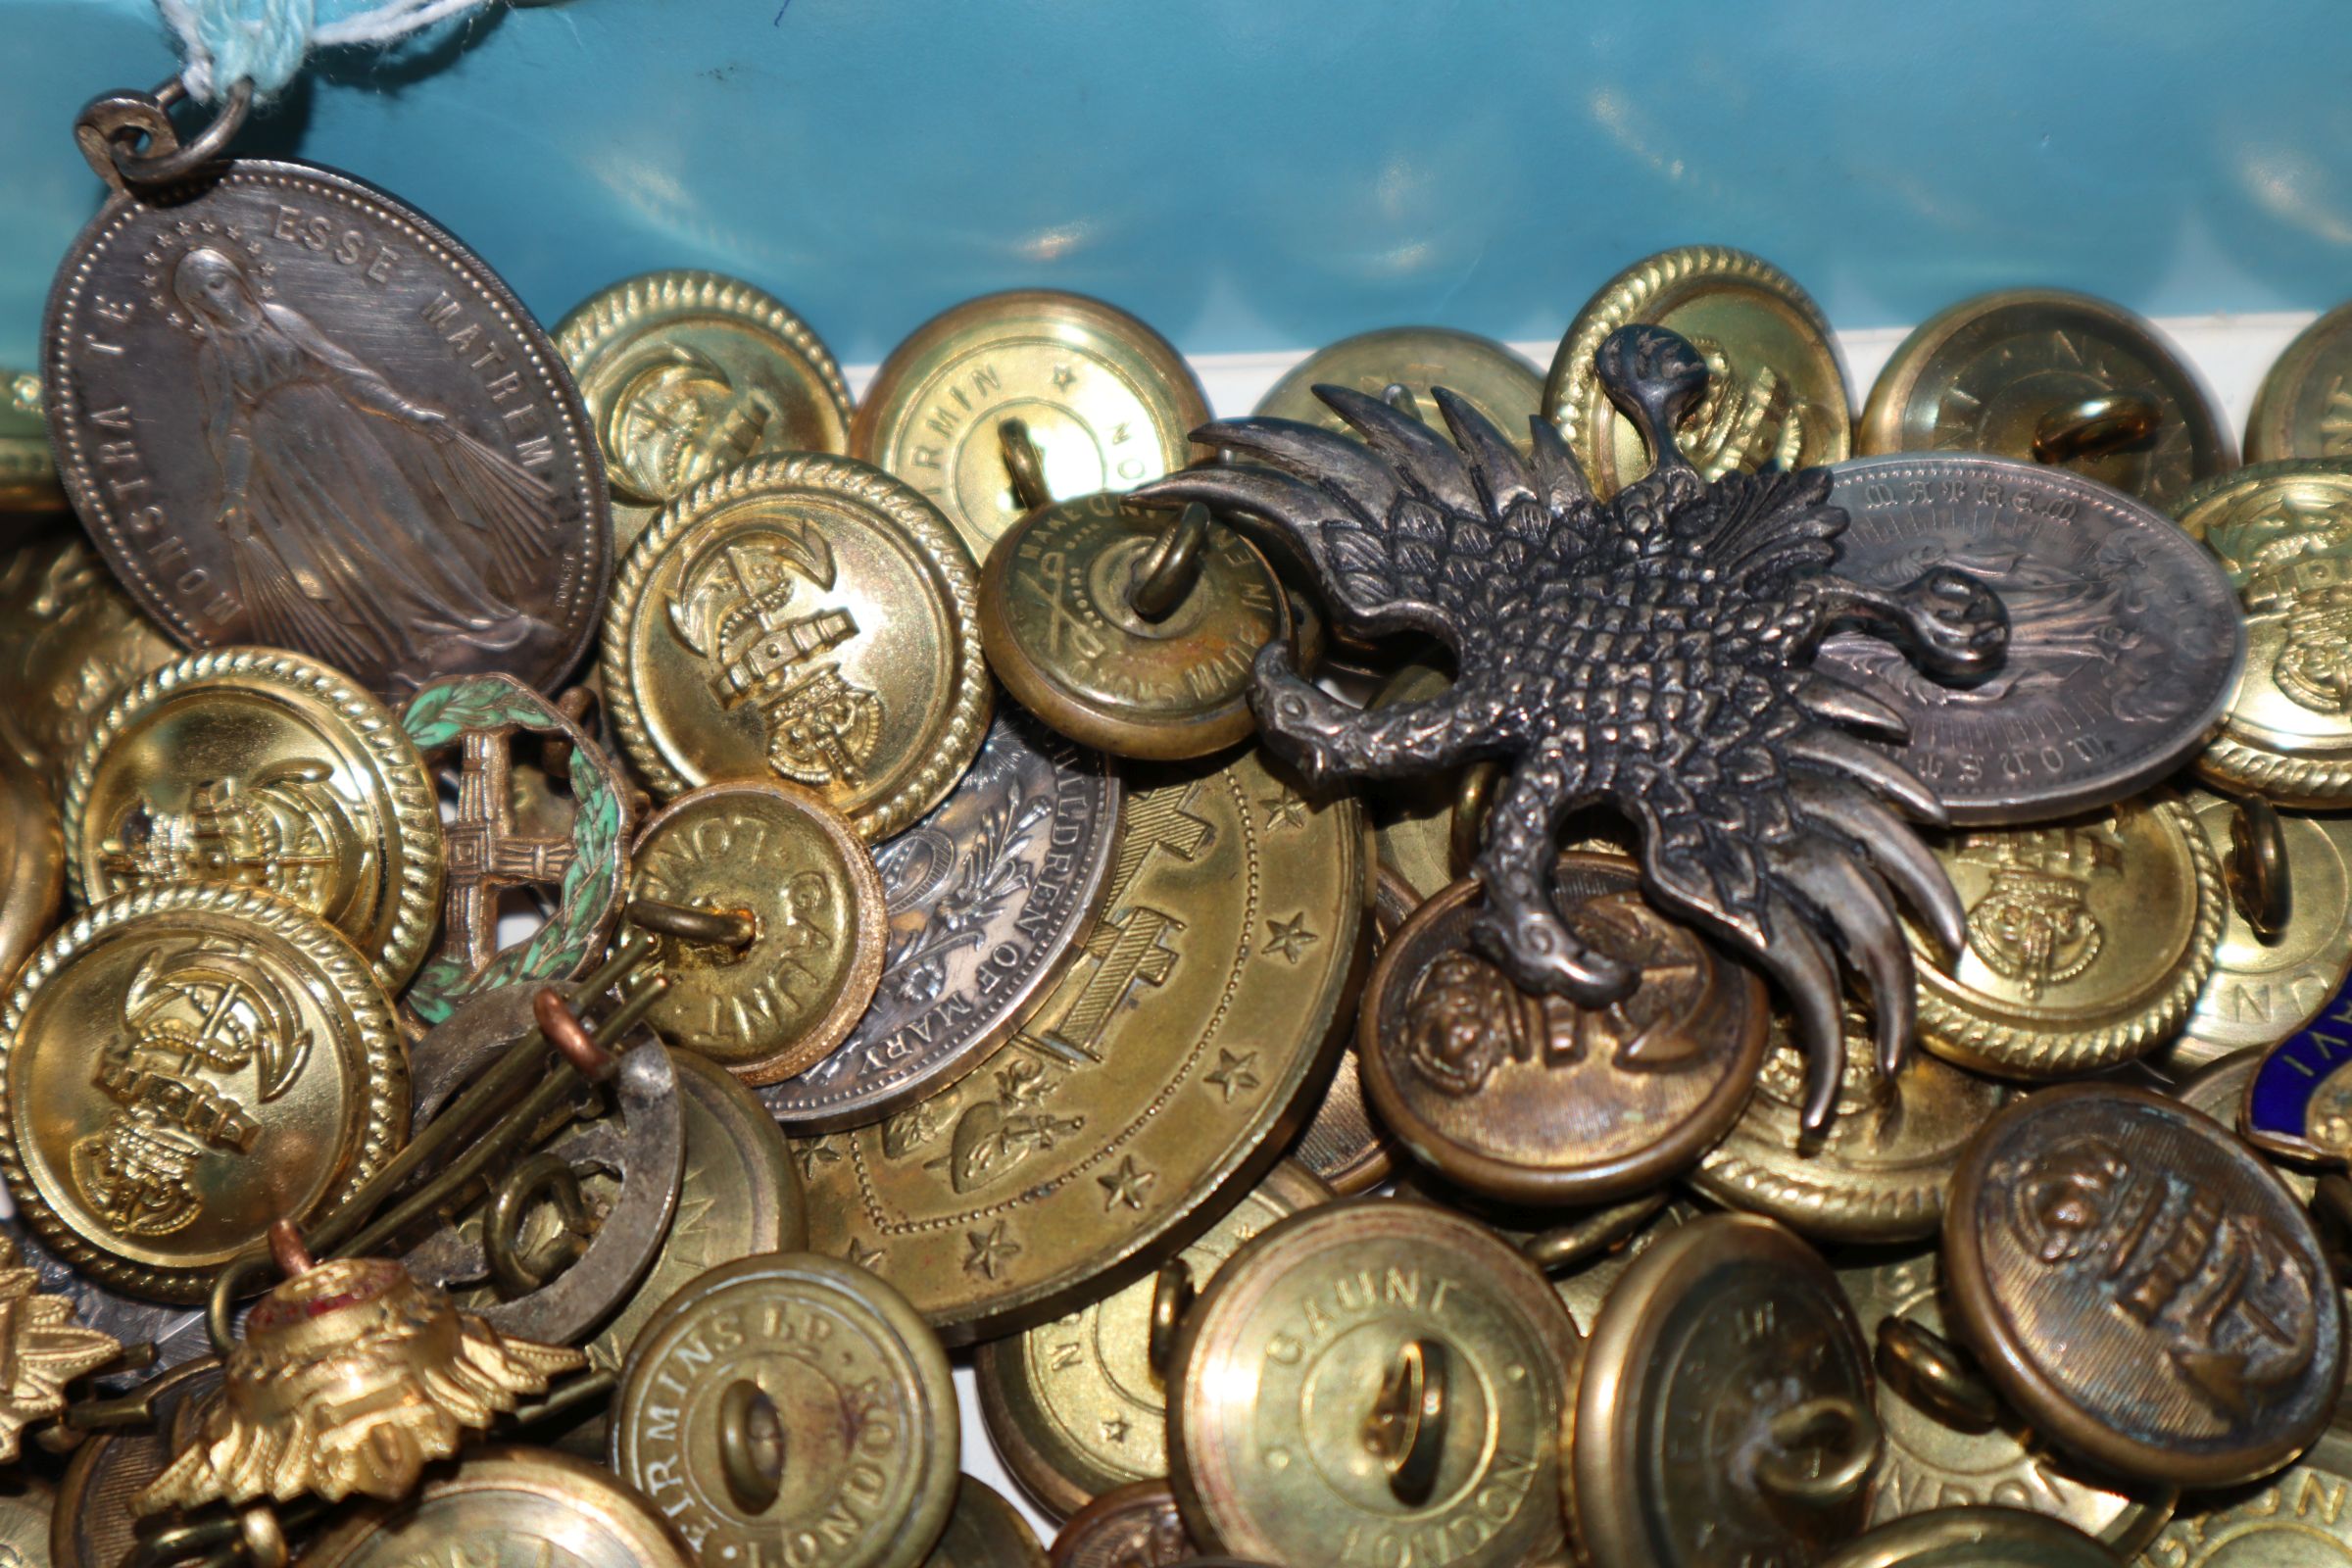 Assorted medallions and military buttons etc. - Image 3 of 12